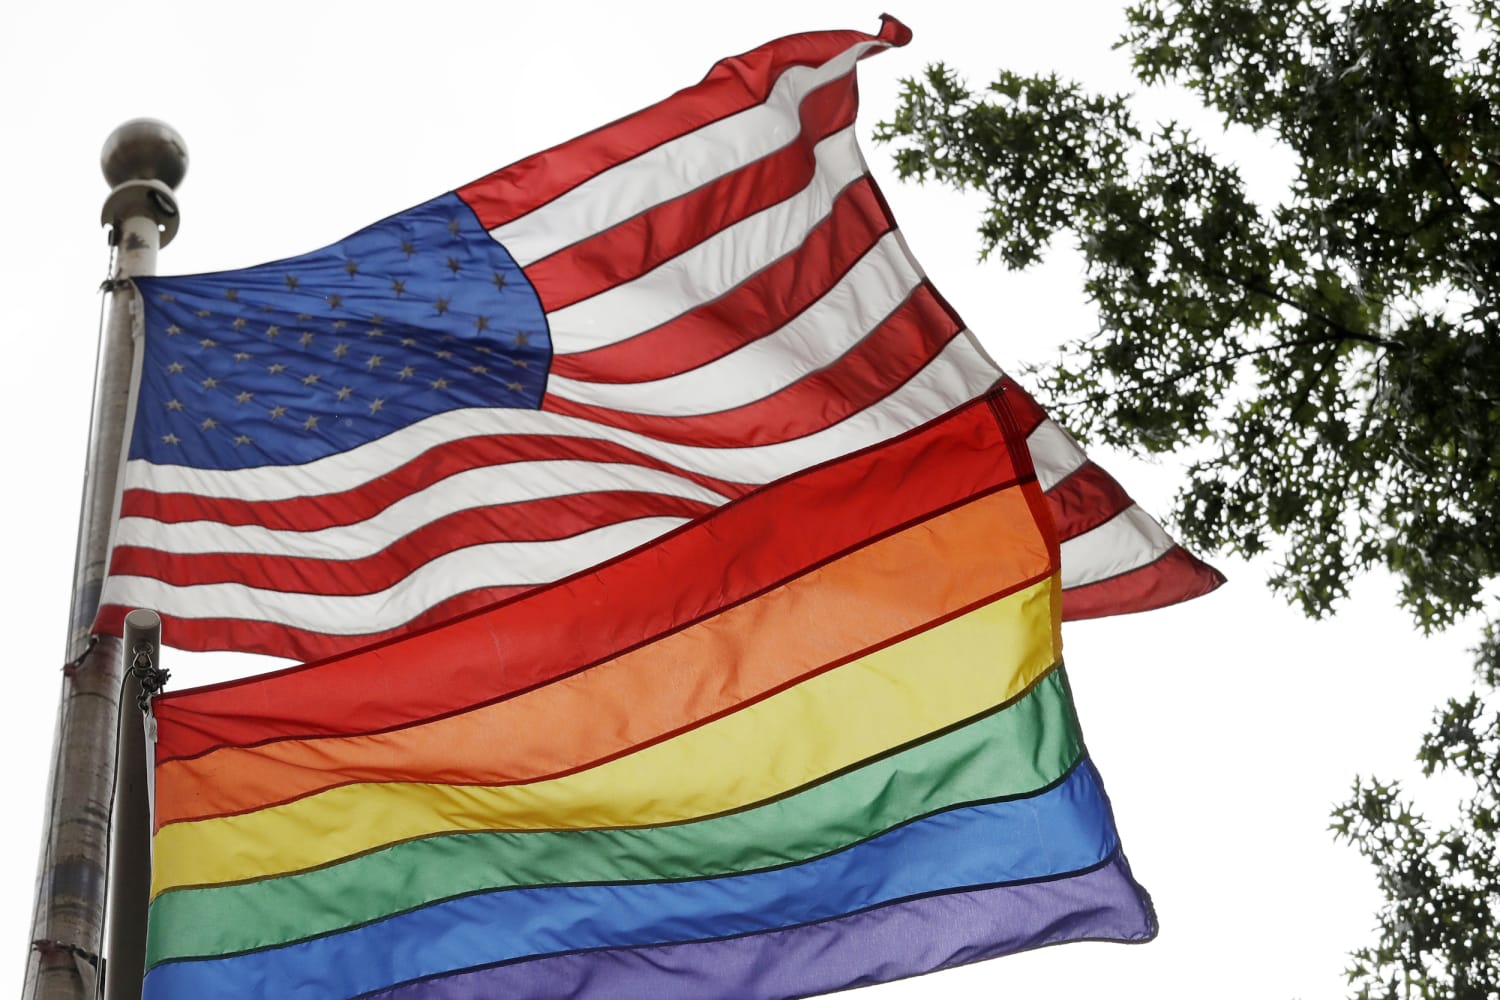 Trump admin tells U.S. embassies they can't fly pride flag on flagpoles